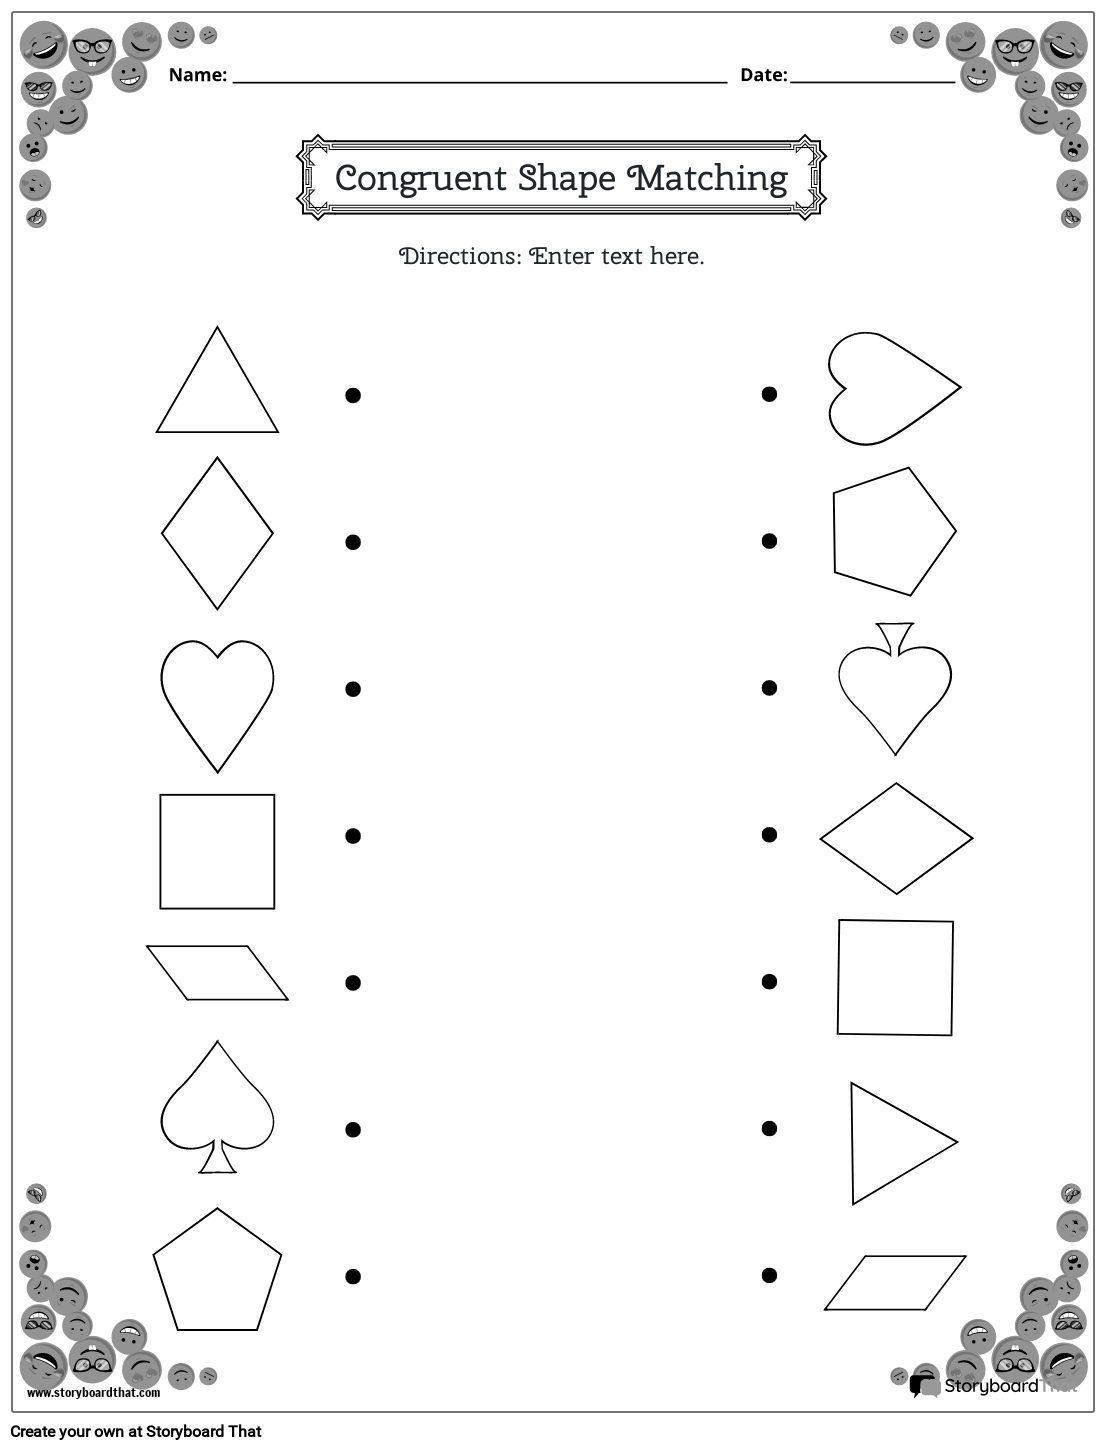 Matching Congruent Shapes Worksheet with Smiley Face Border (black and whit